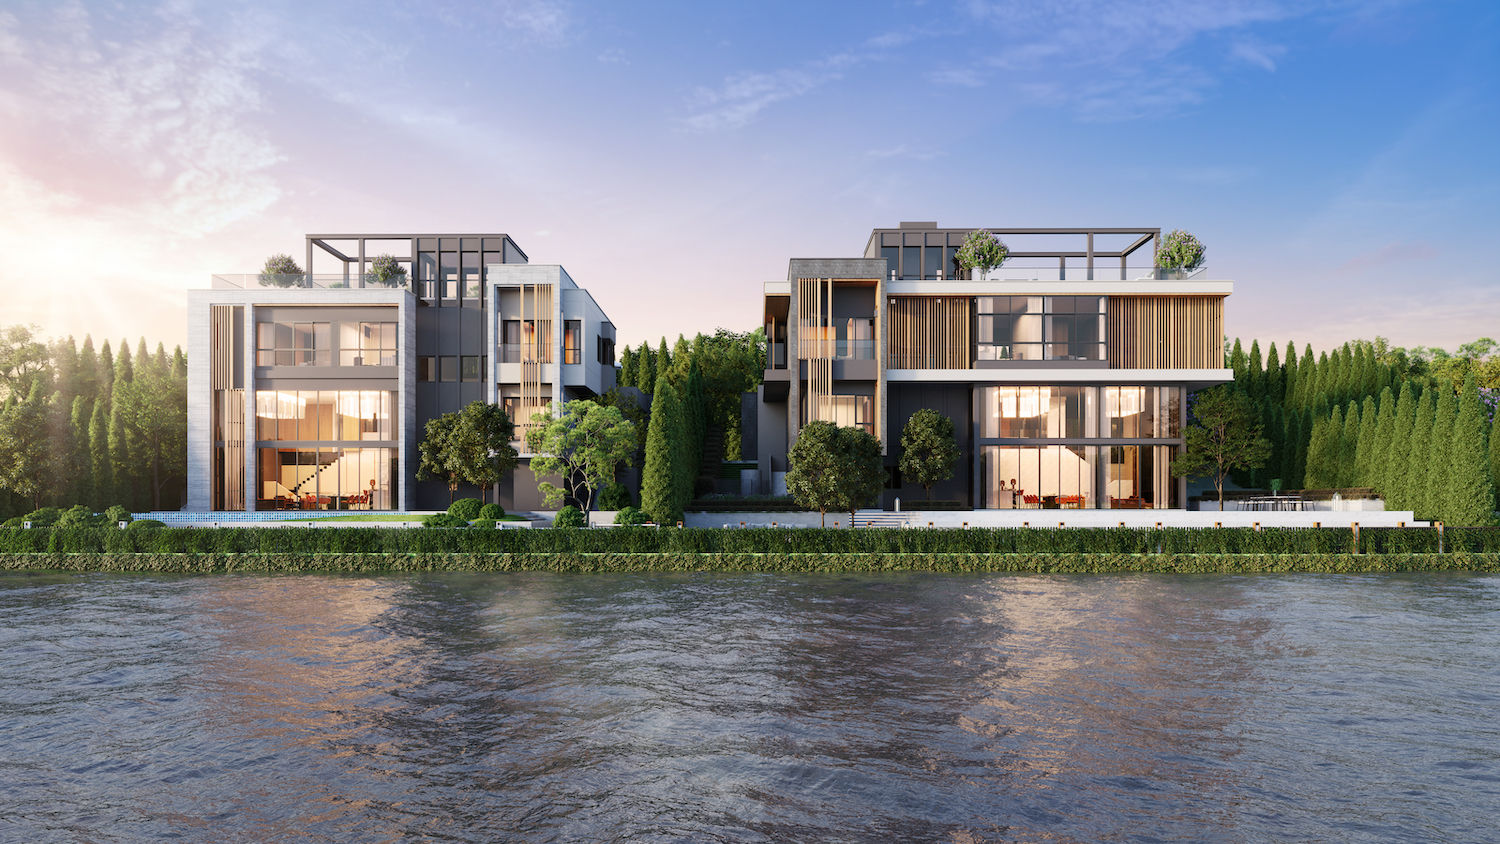 The New Lake Legend Bangna-Suvarnabhumi with 100-rai Lake View Promises a Living Experience Like No Other